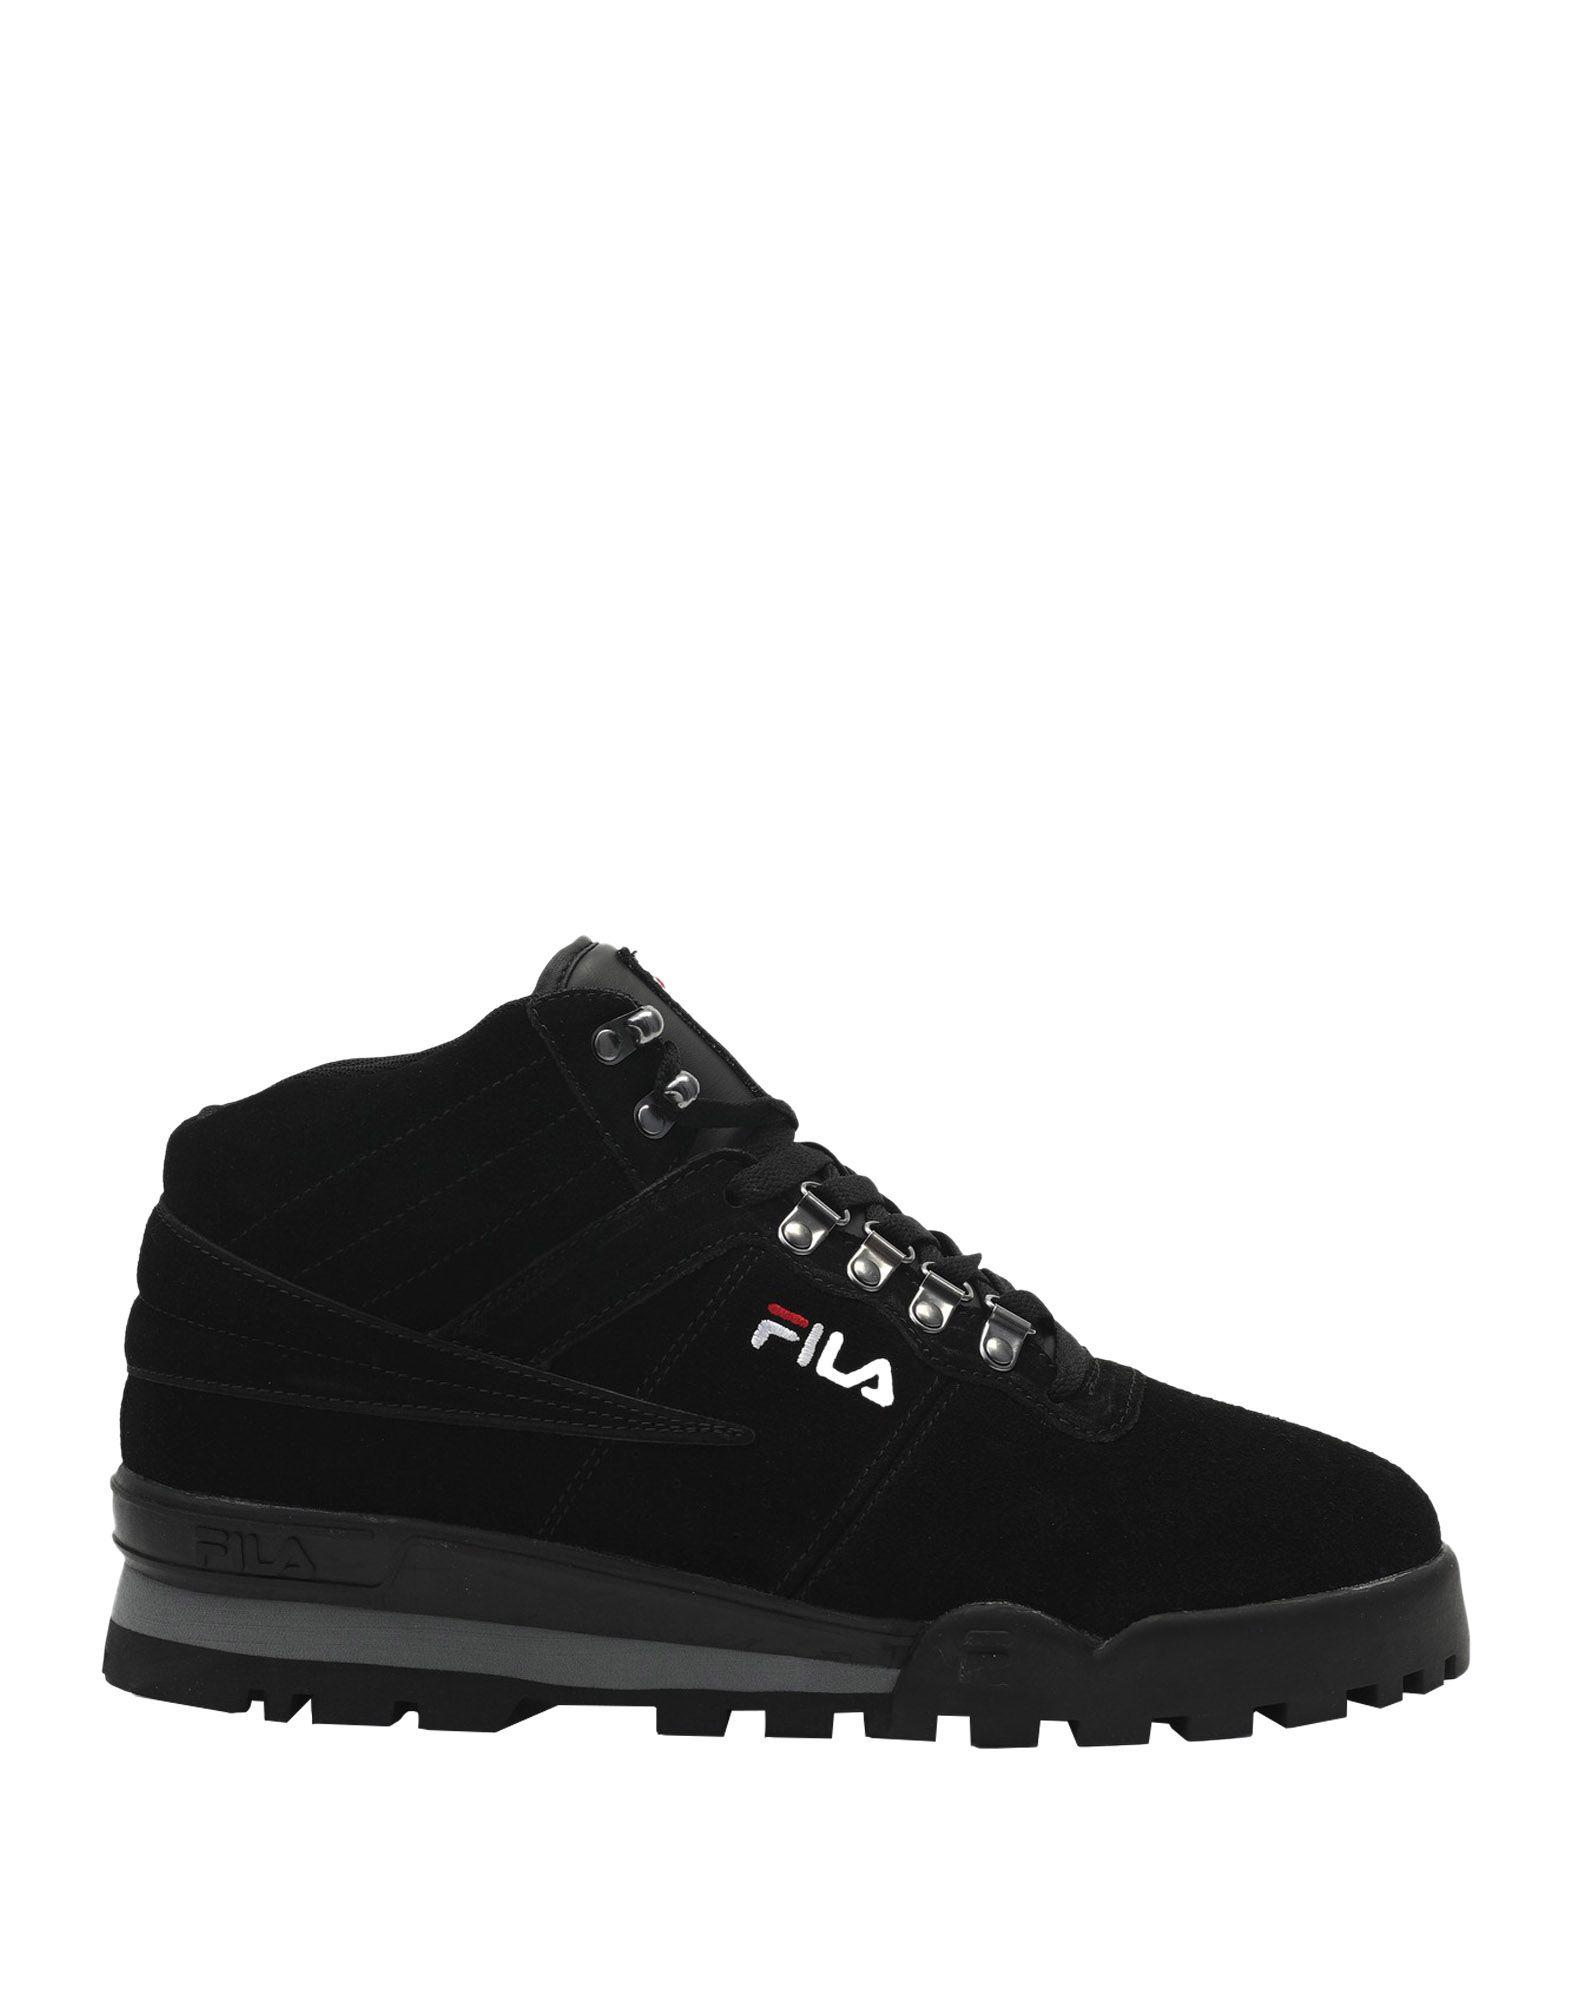 Aggregate more than 144 fila black sneakers shoes latest - kenmei.edu.vn